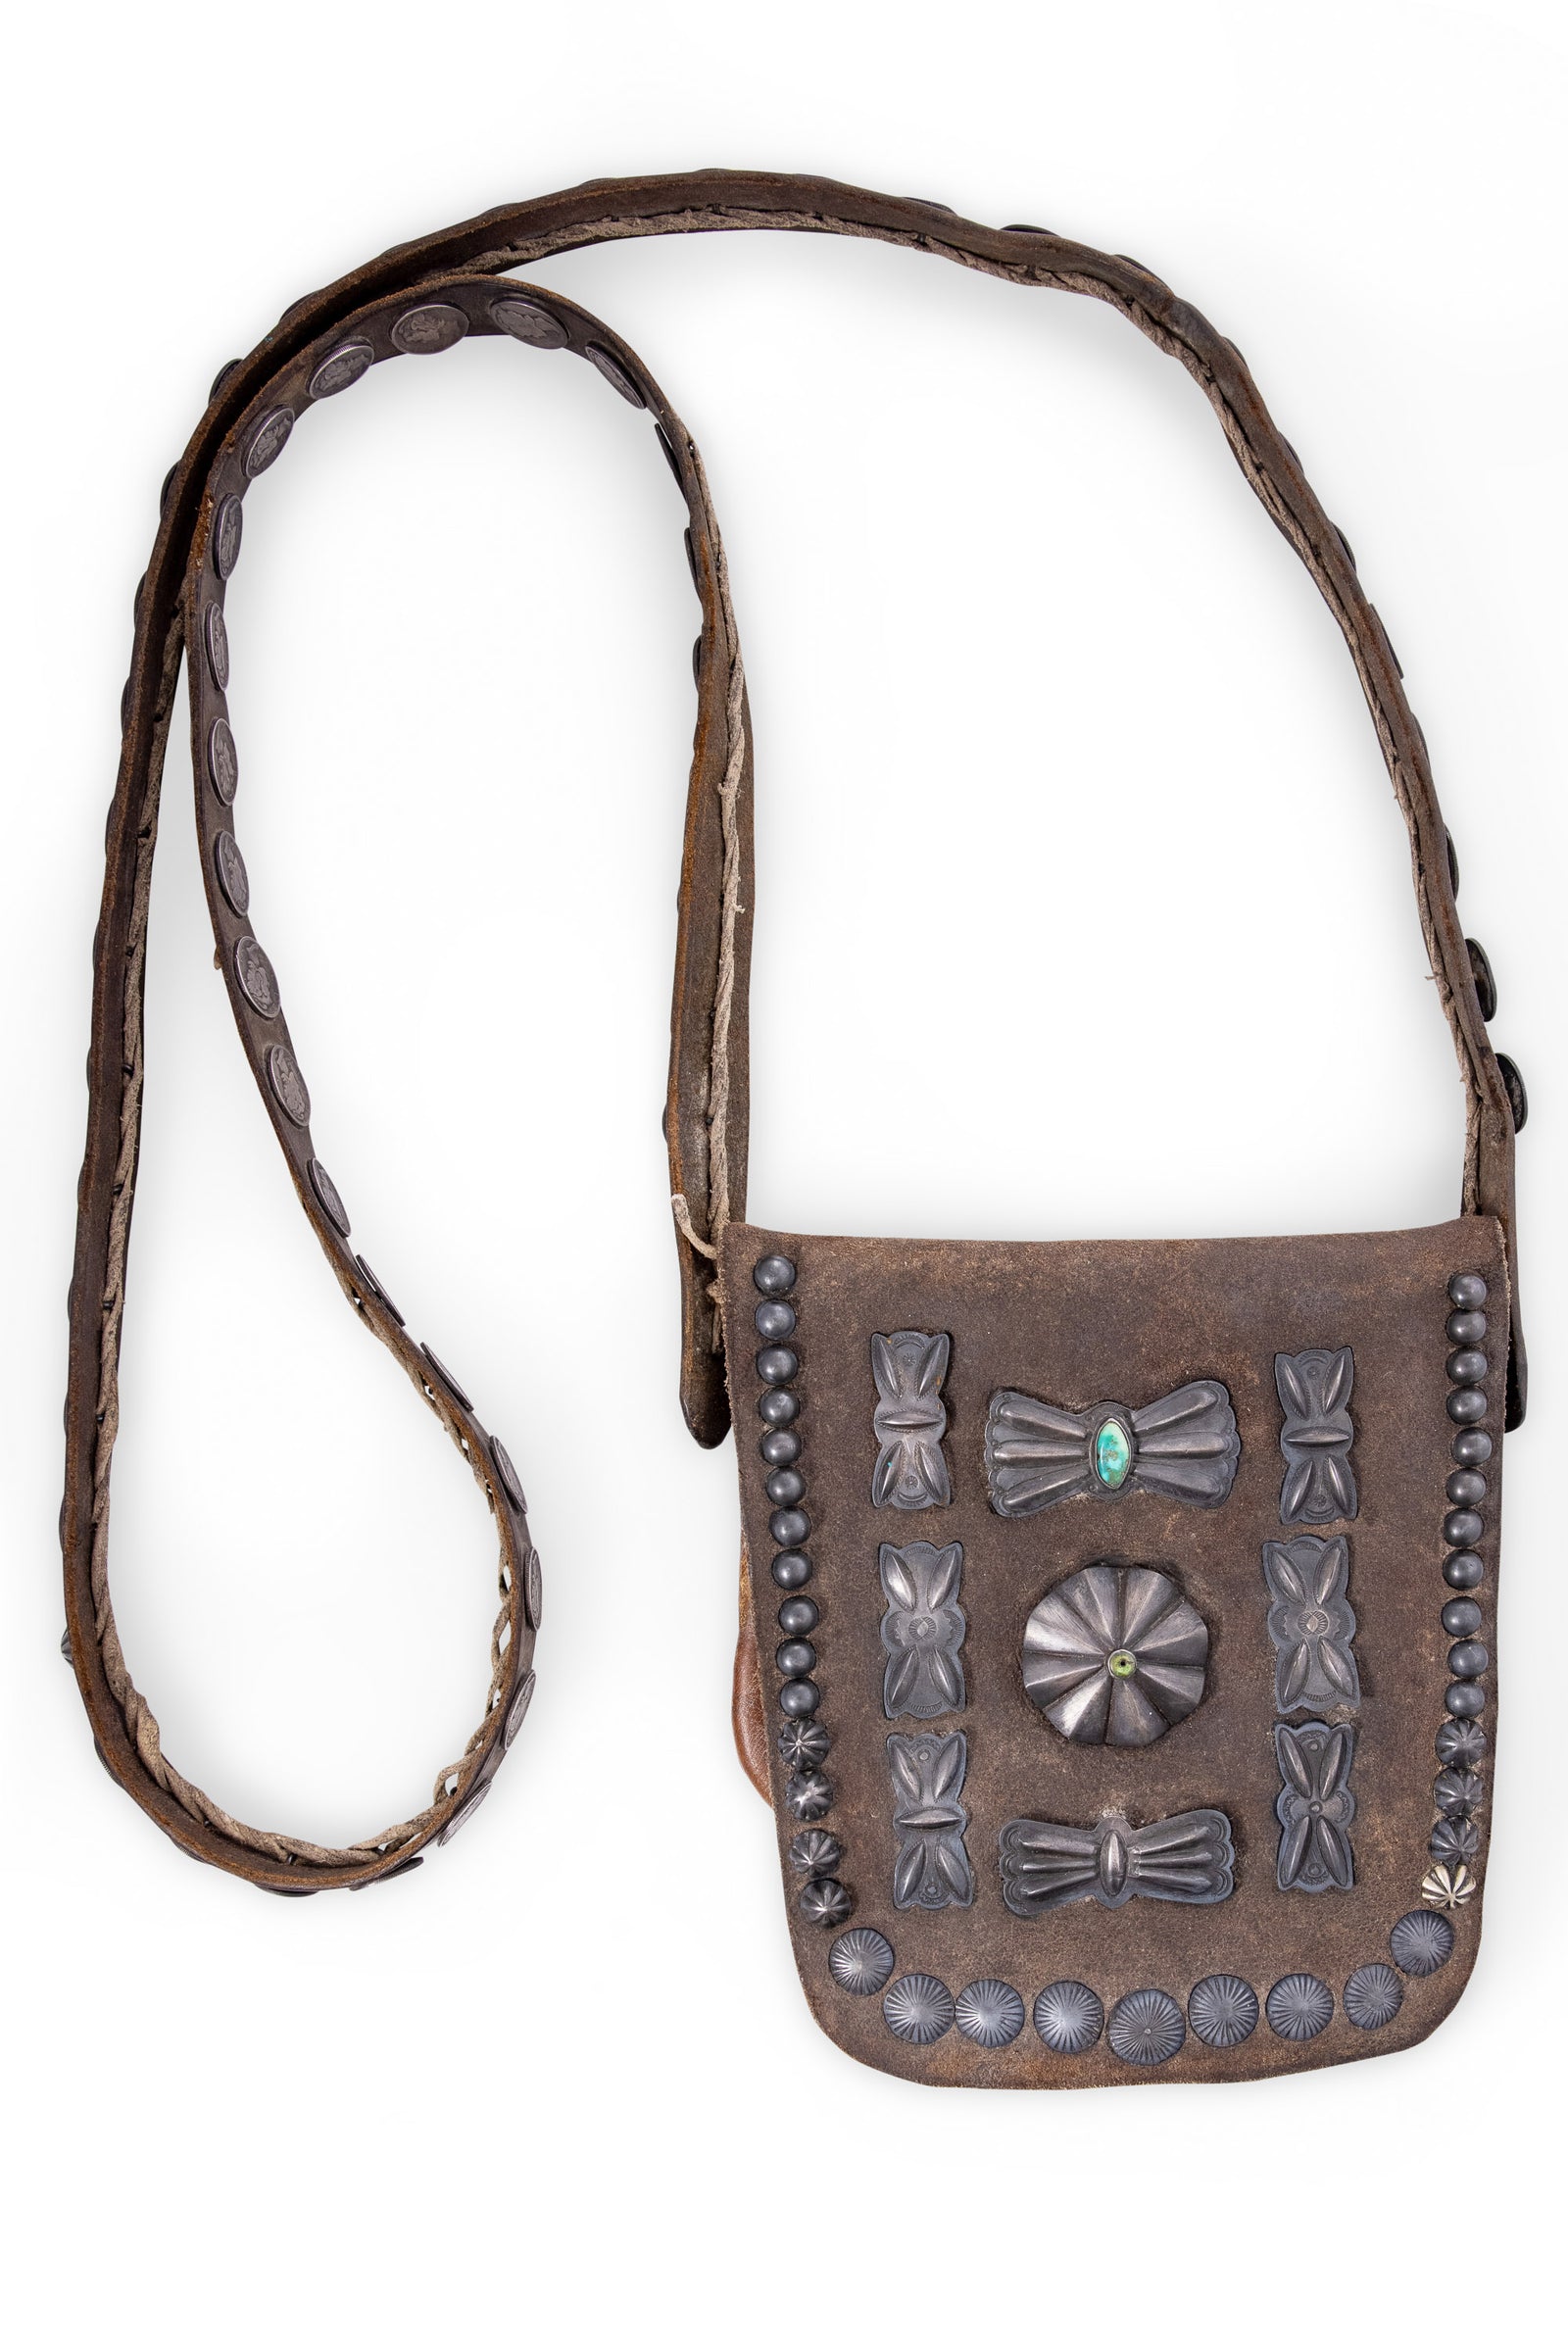 Leather Purses for sale in Cody, Wyoming